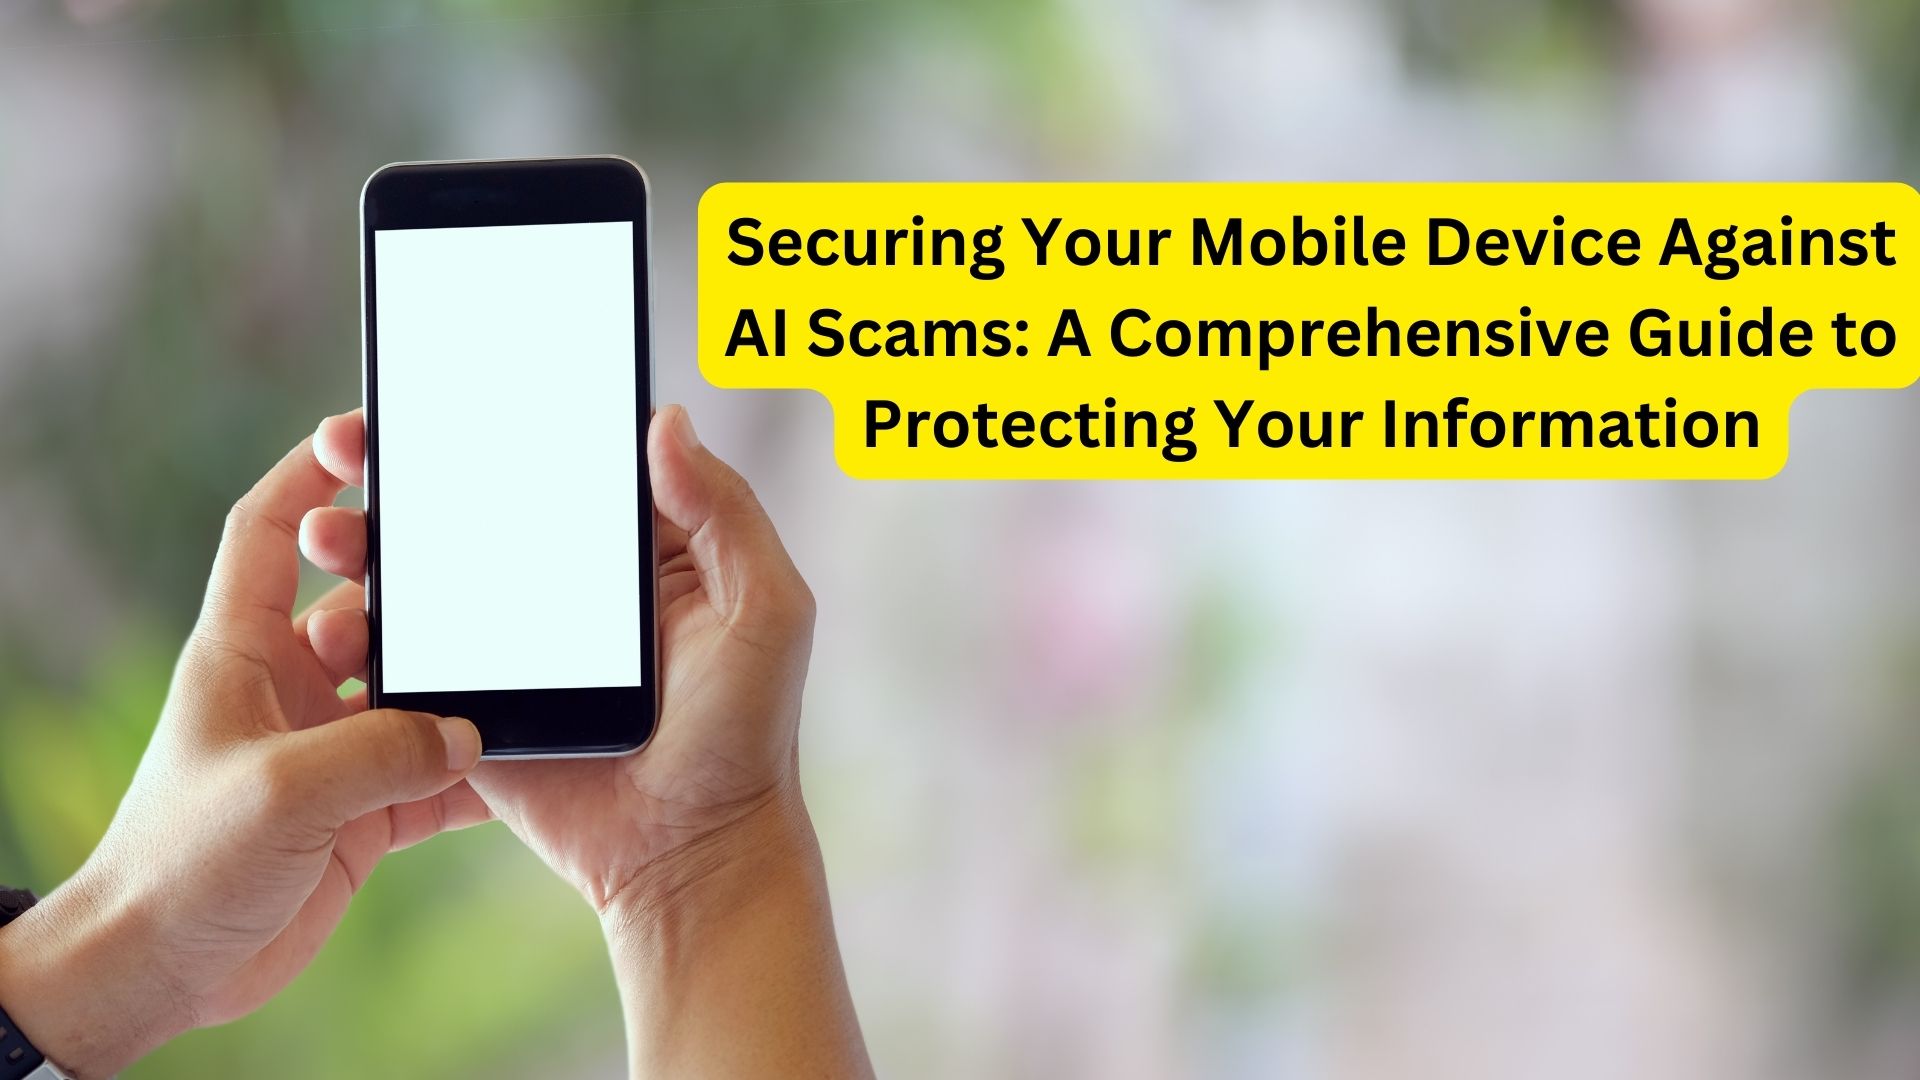 Securing Your Mobile Device Against AI Scams: A Comprehensive Guide to Protecting Your Information